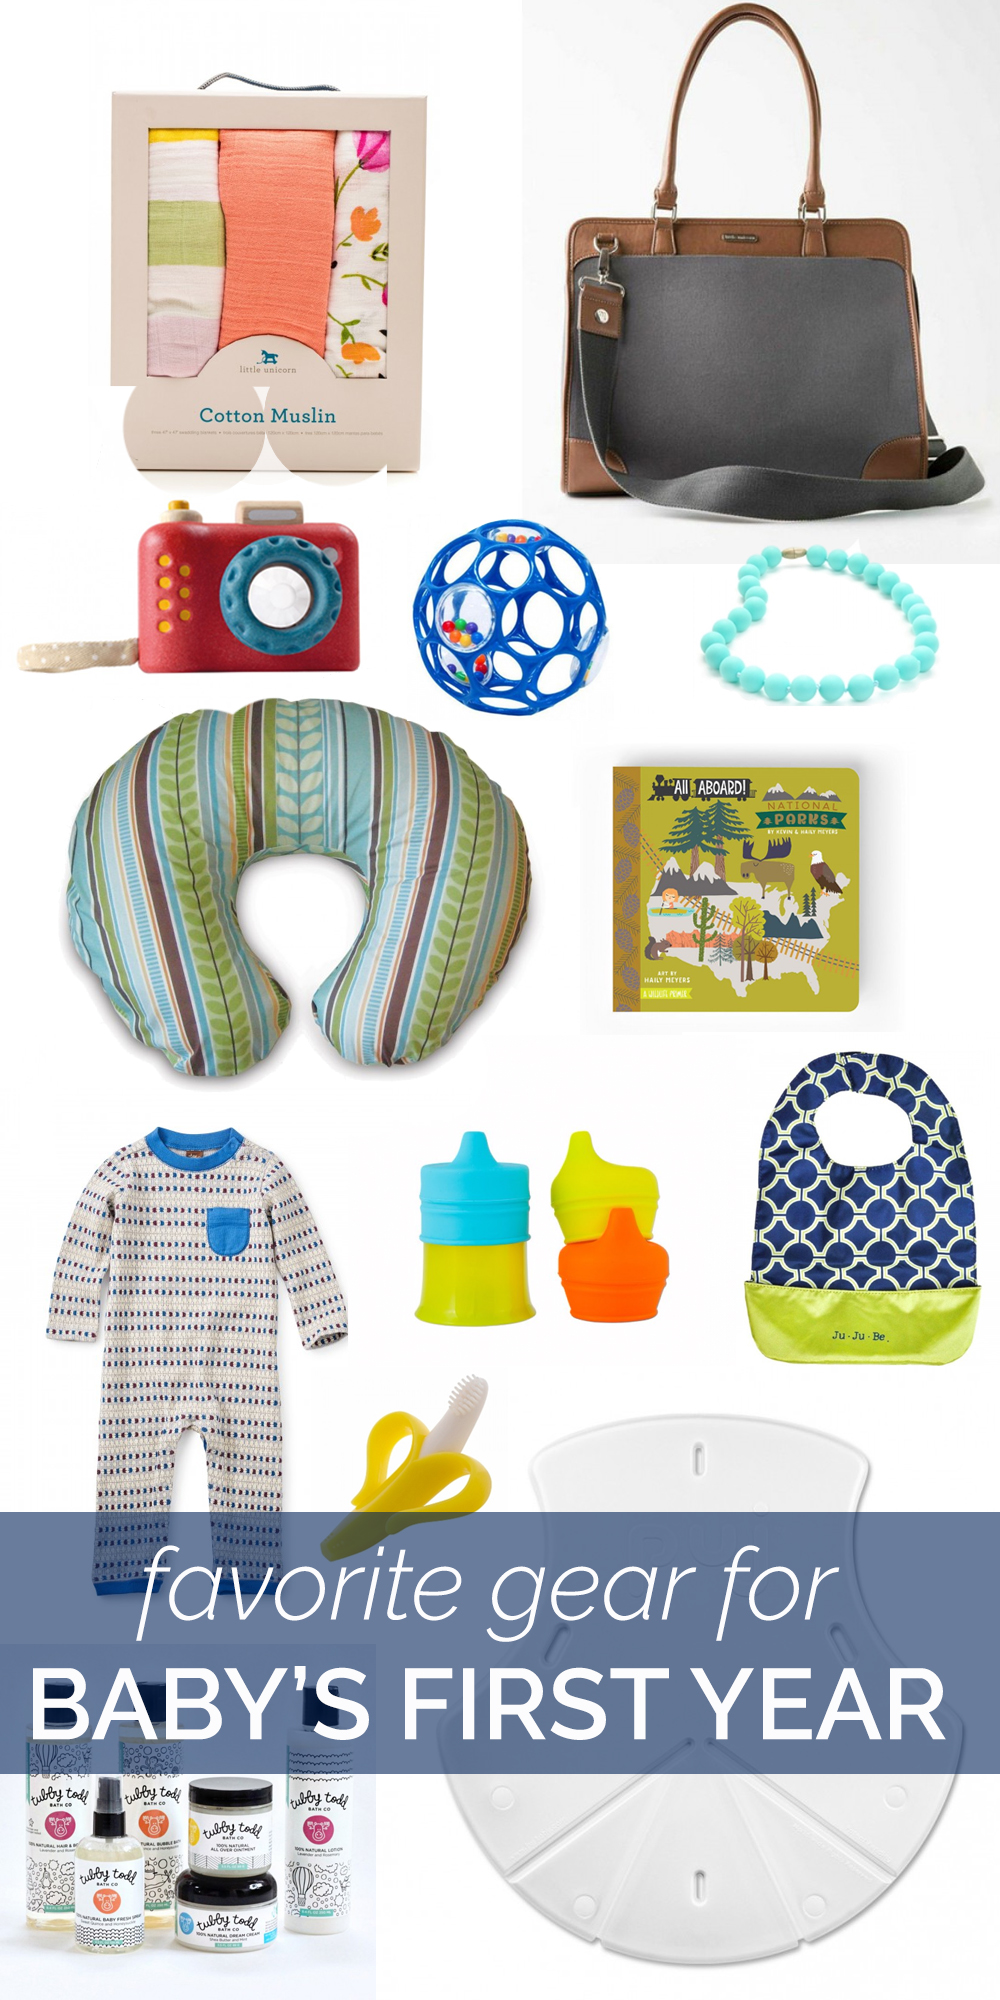 Some of My Favorite Gear For Baby’s First Year